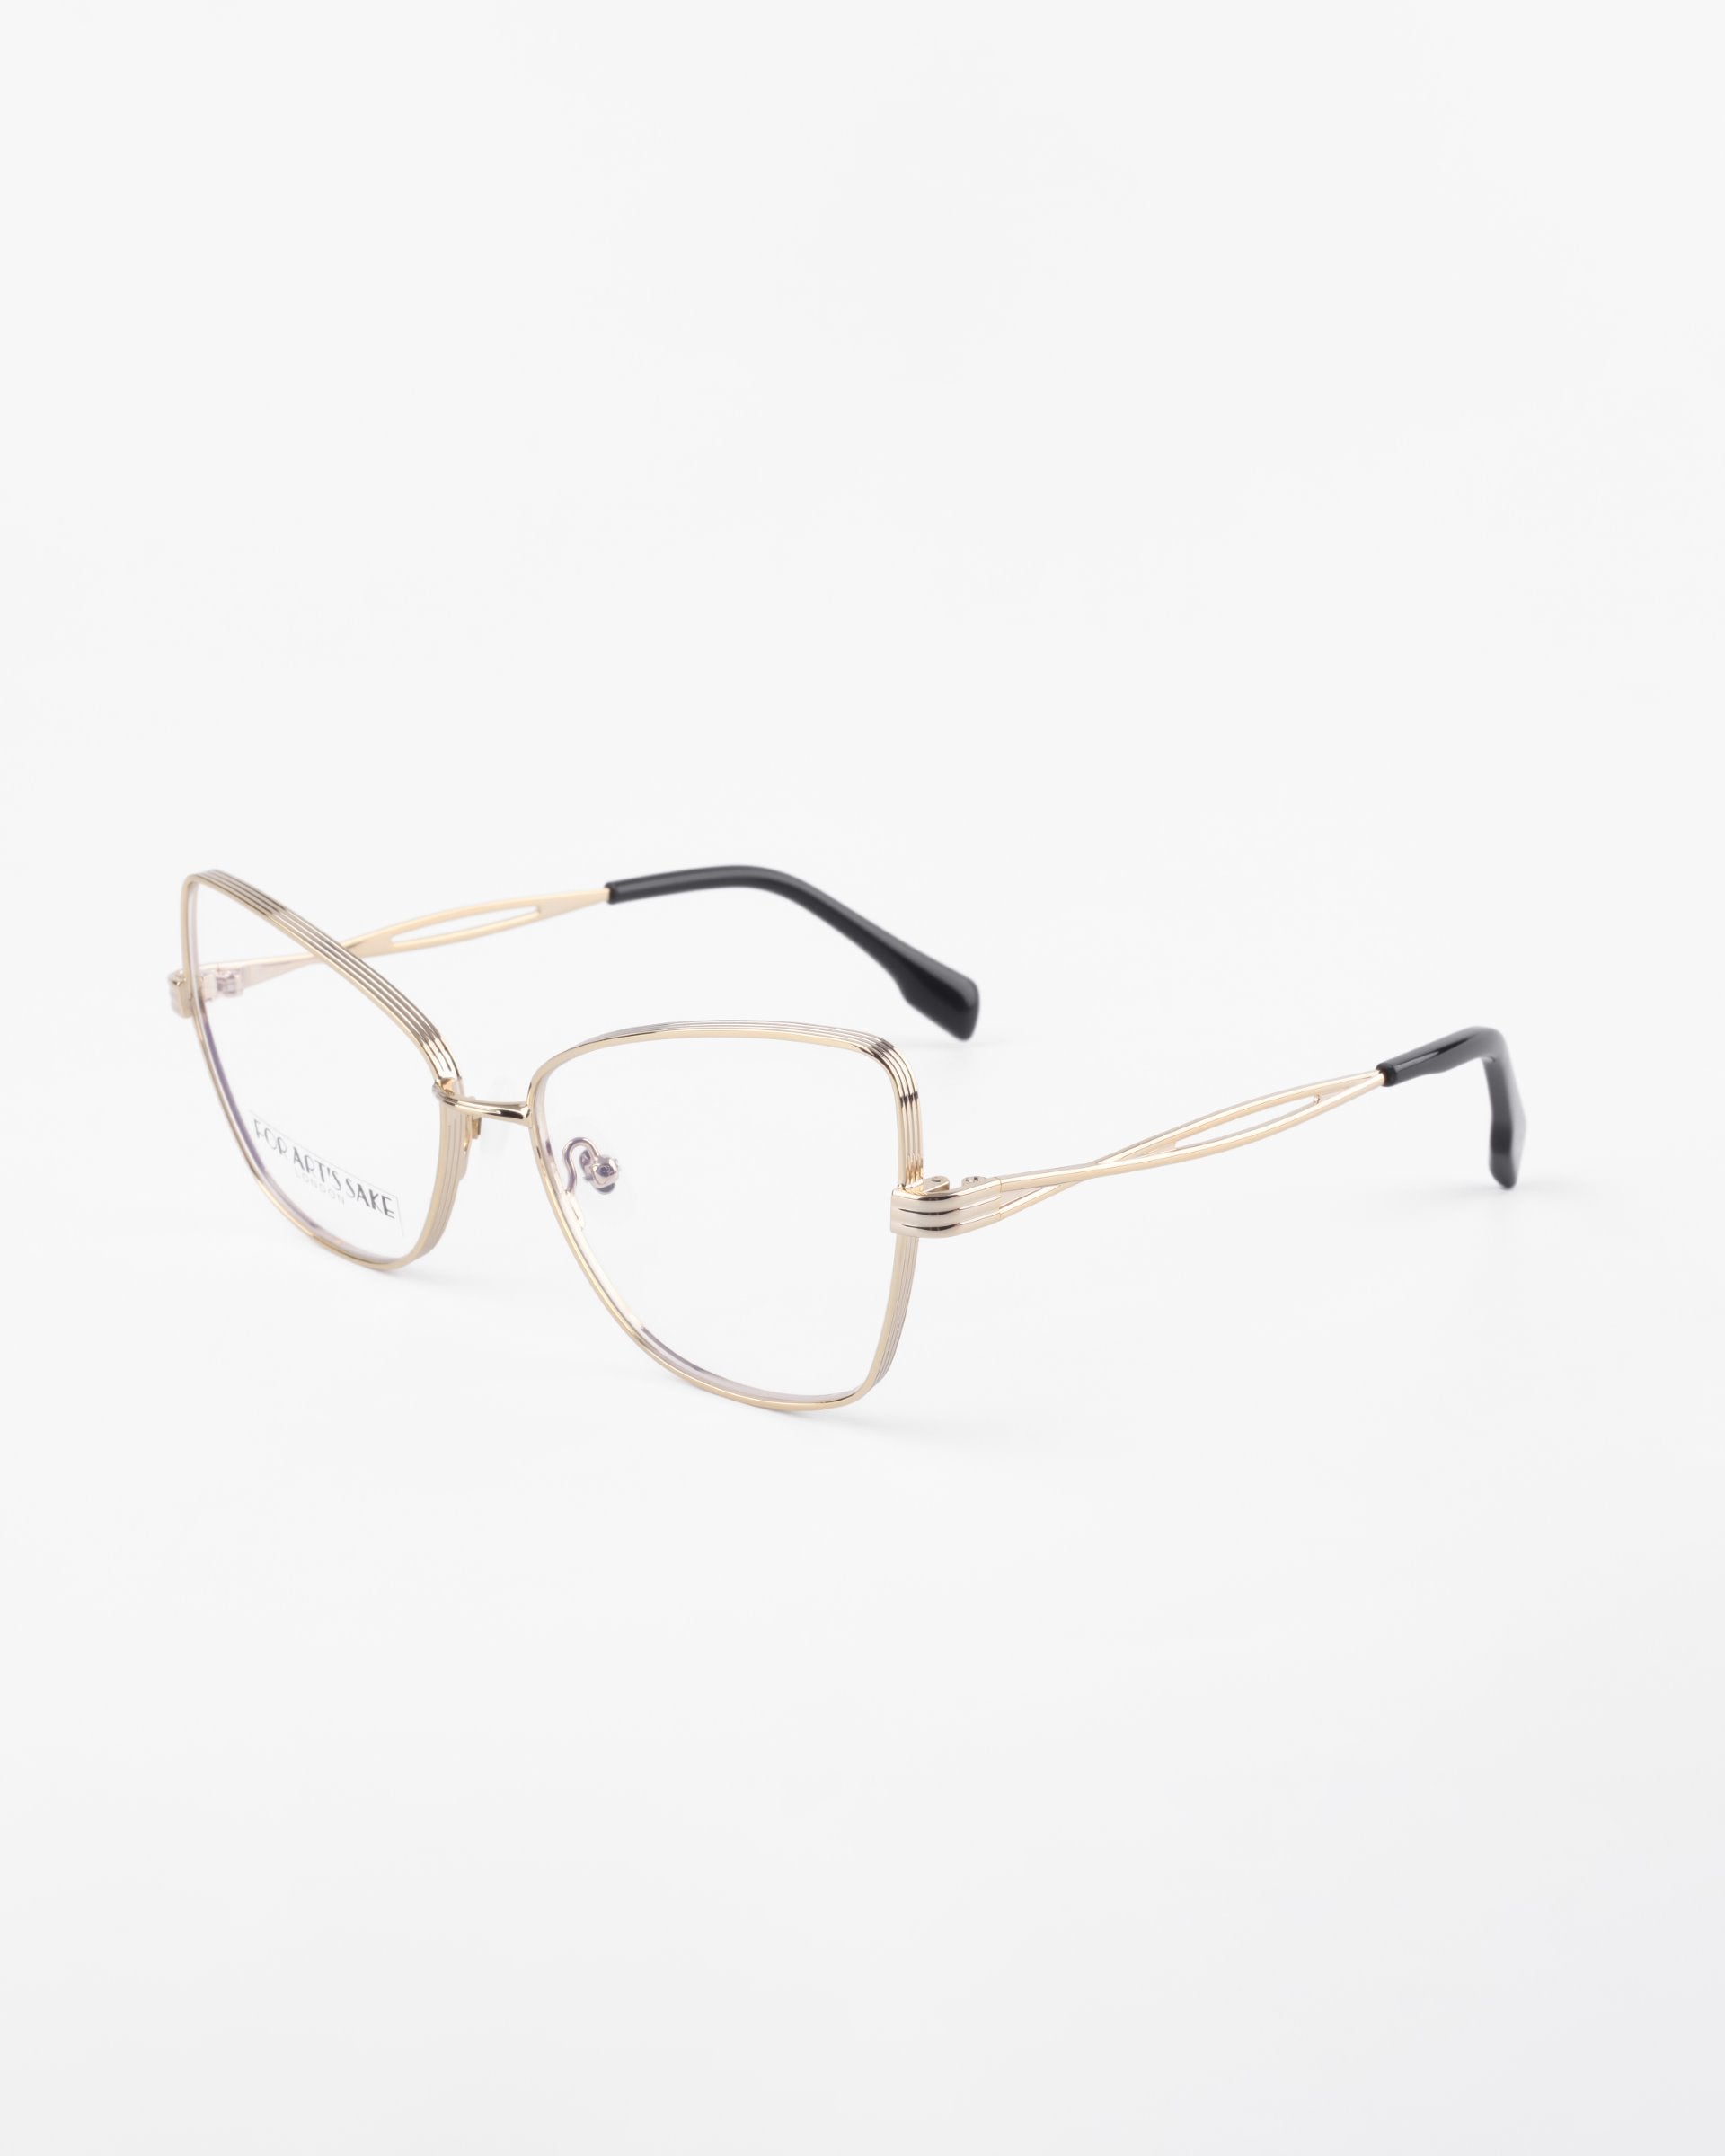 A pair of For Art&#39;s Sake® Lady eyeglasses with gold wire frames and a cat-eye silhouette. The temples feature a delicate, openwork design and have black plastic tips for comfort. These stylish glasses can be fitted with prescription lenses or an optional blue light filter. The background is a plain white surface.